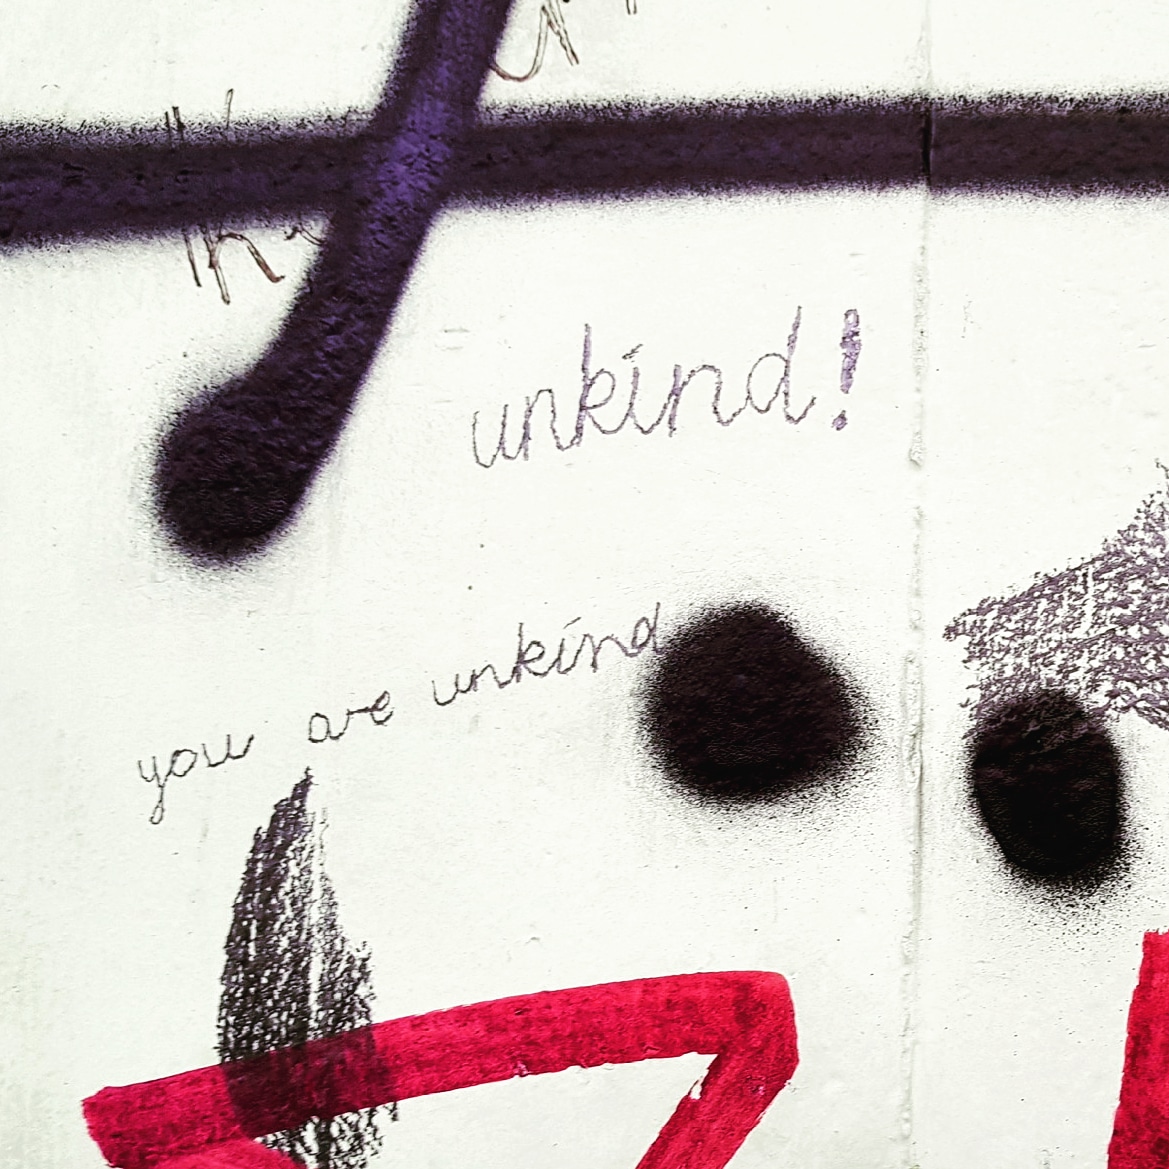 red and black graffiti on a wall including the words 'unkind' and 'you are unkind'